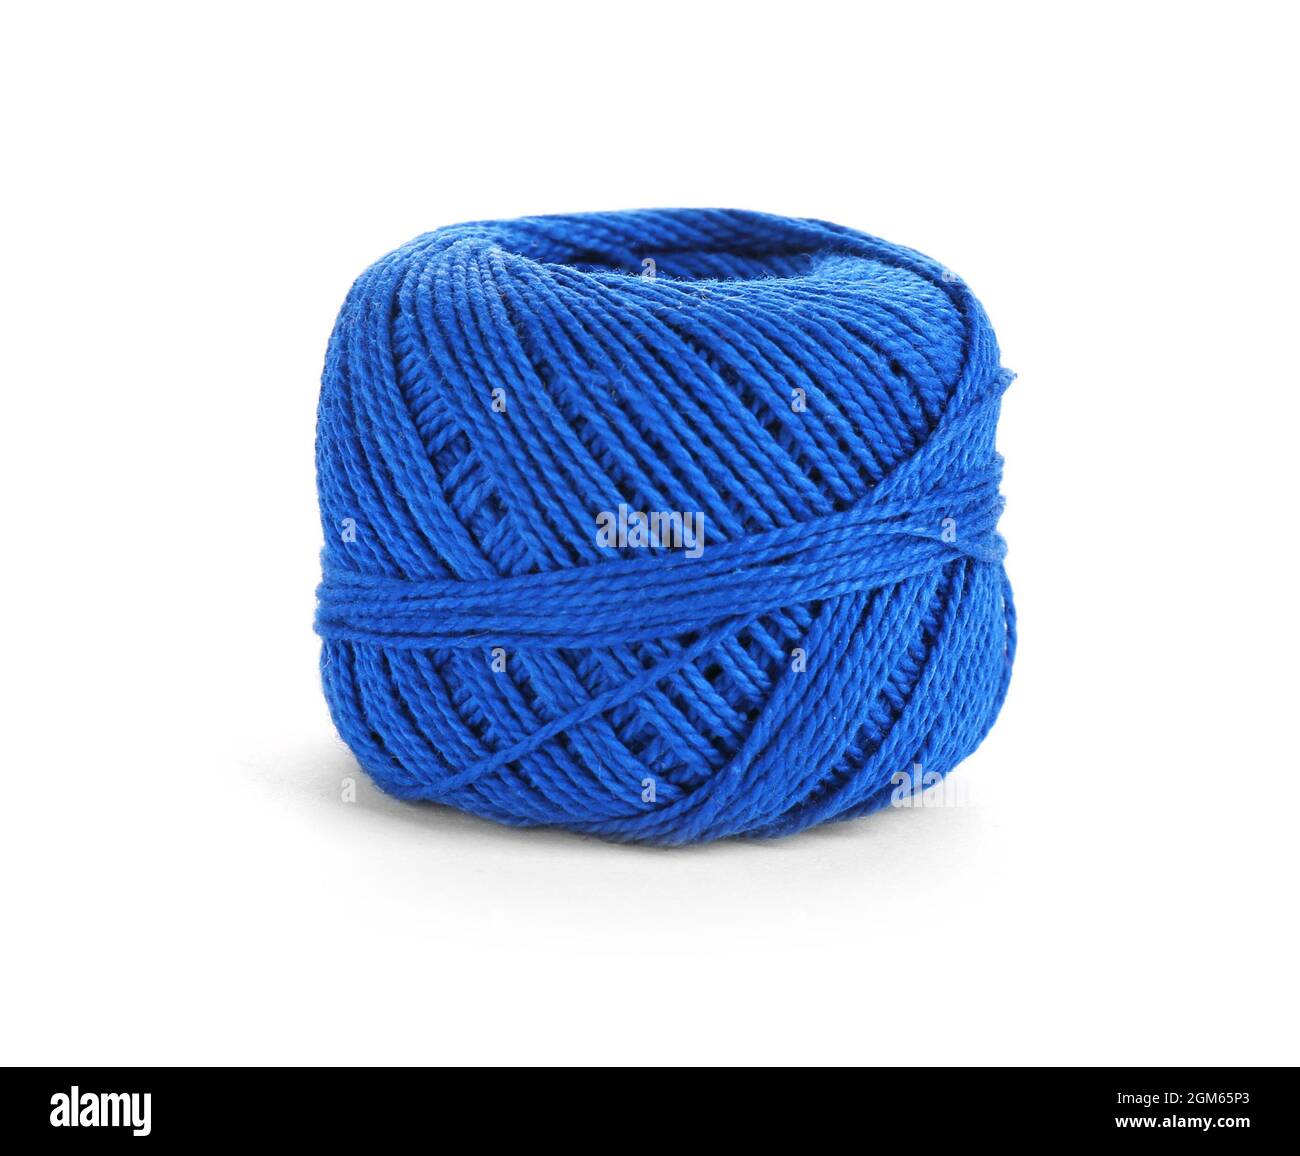 color-thread-for-crocheting-on-white-background-stock-photo-alamy